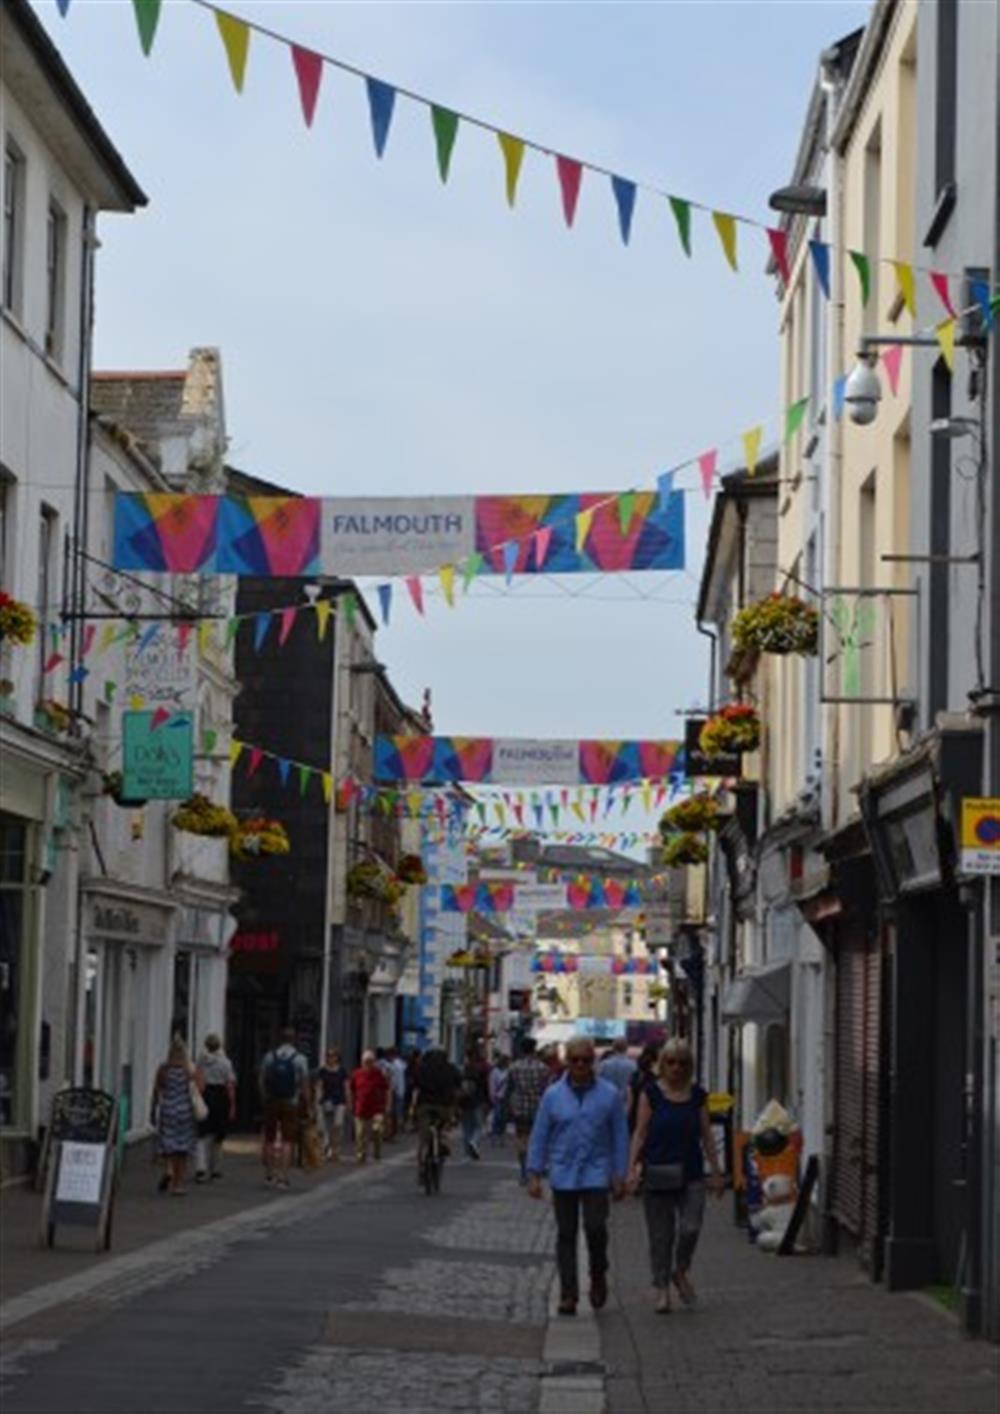 Falmouth town has an array of shops, plus a range of restaurants, cafes and art galleries at Cove 2 in Maenporth